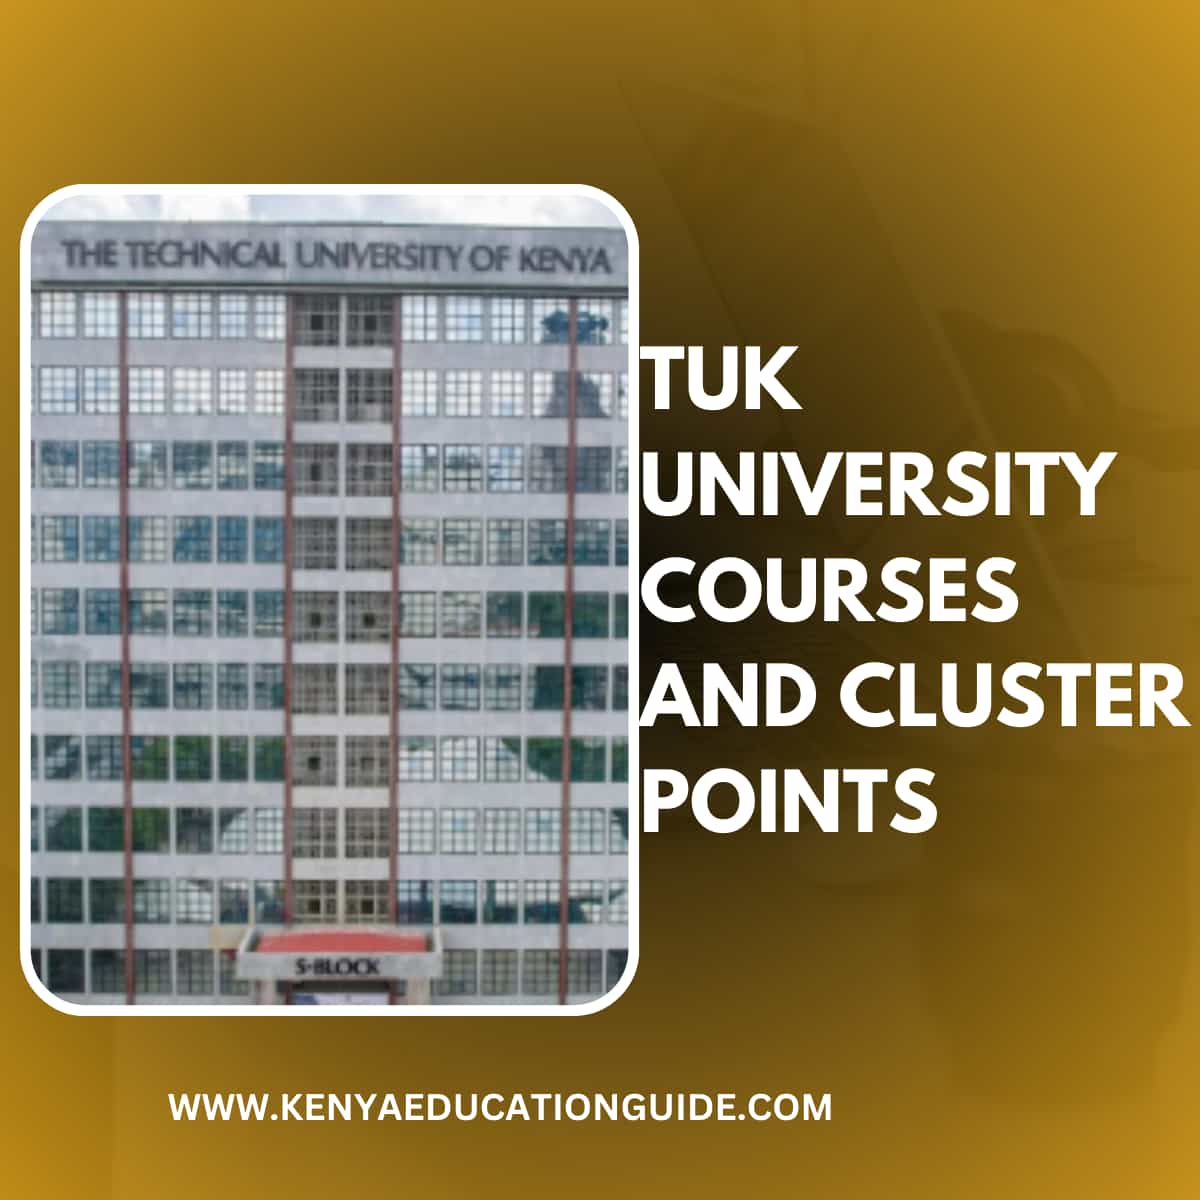 TUK University Courses and Cluster Points